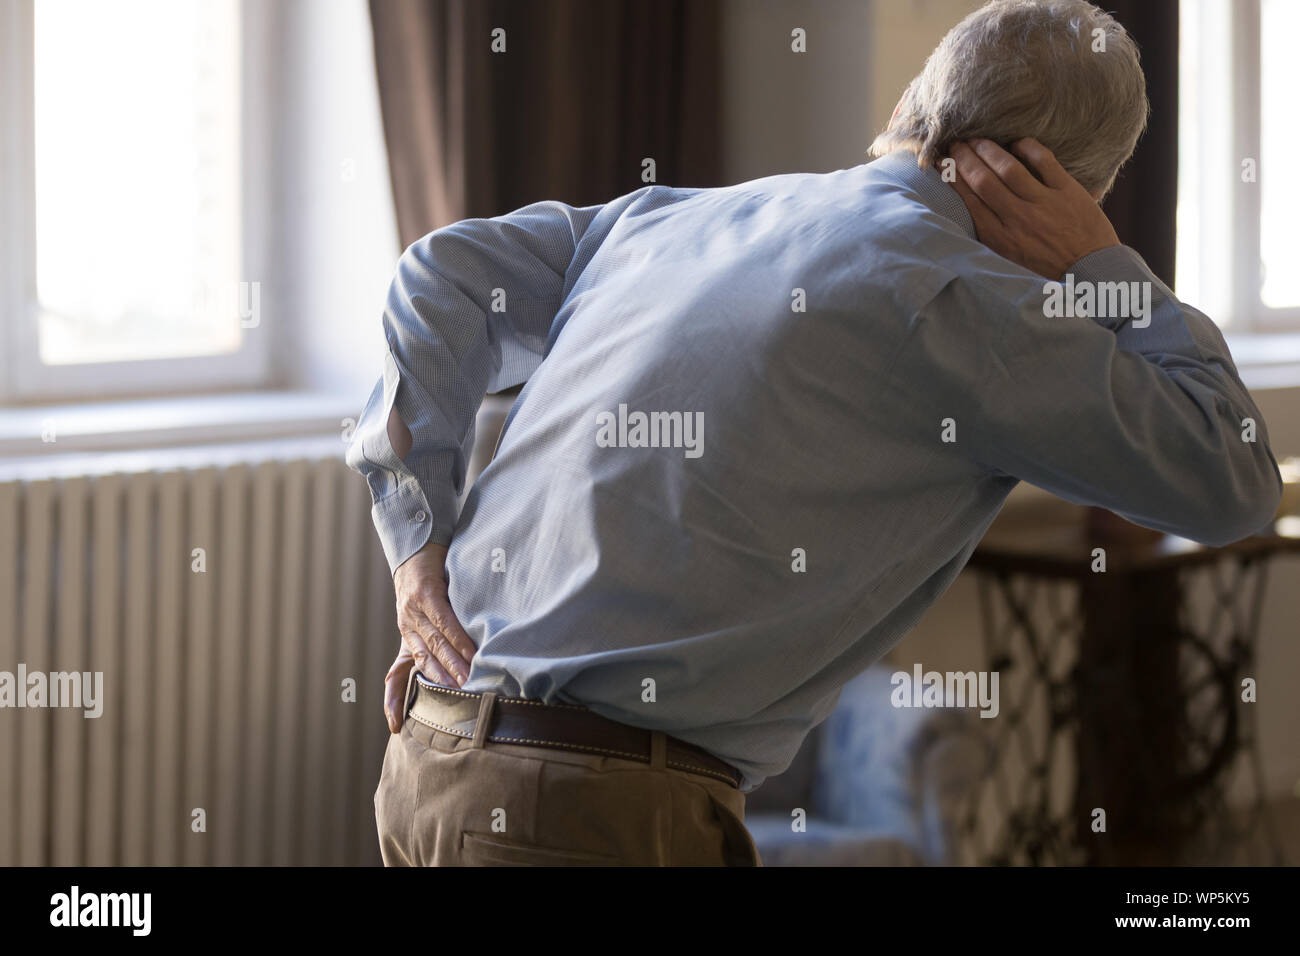 Hurt senior man touch back suffering from rheumatism Stock Photo